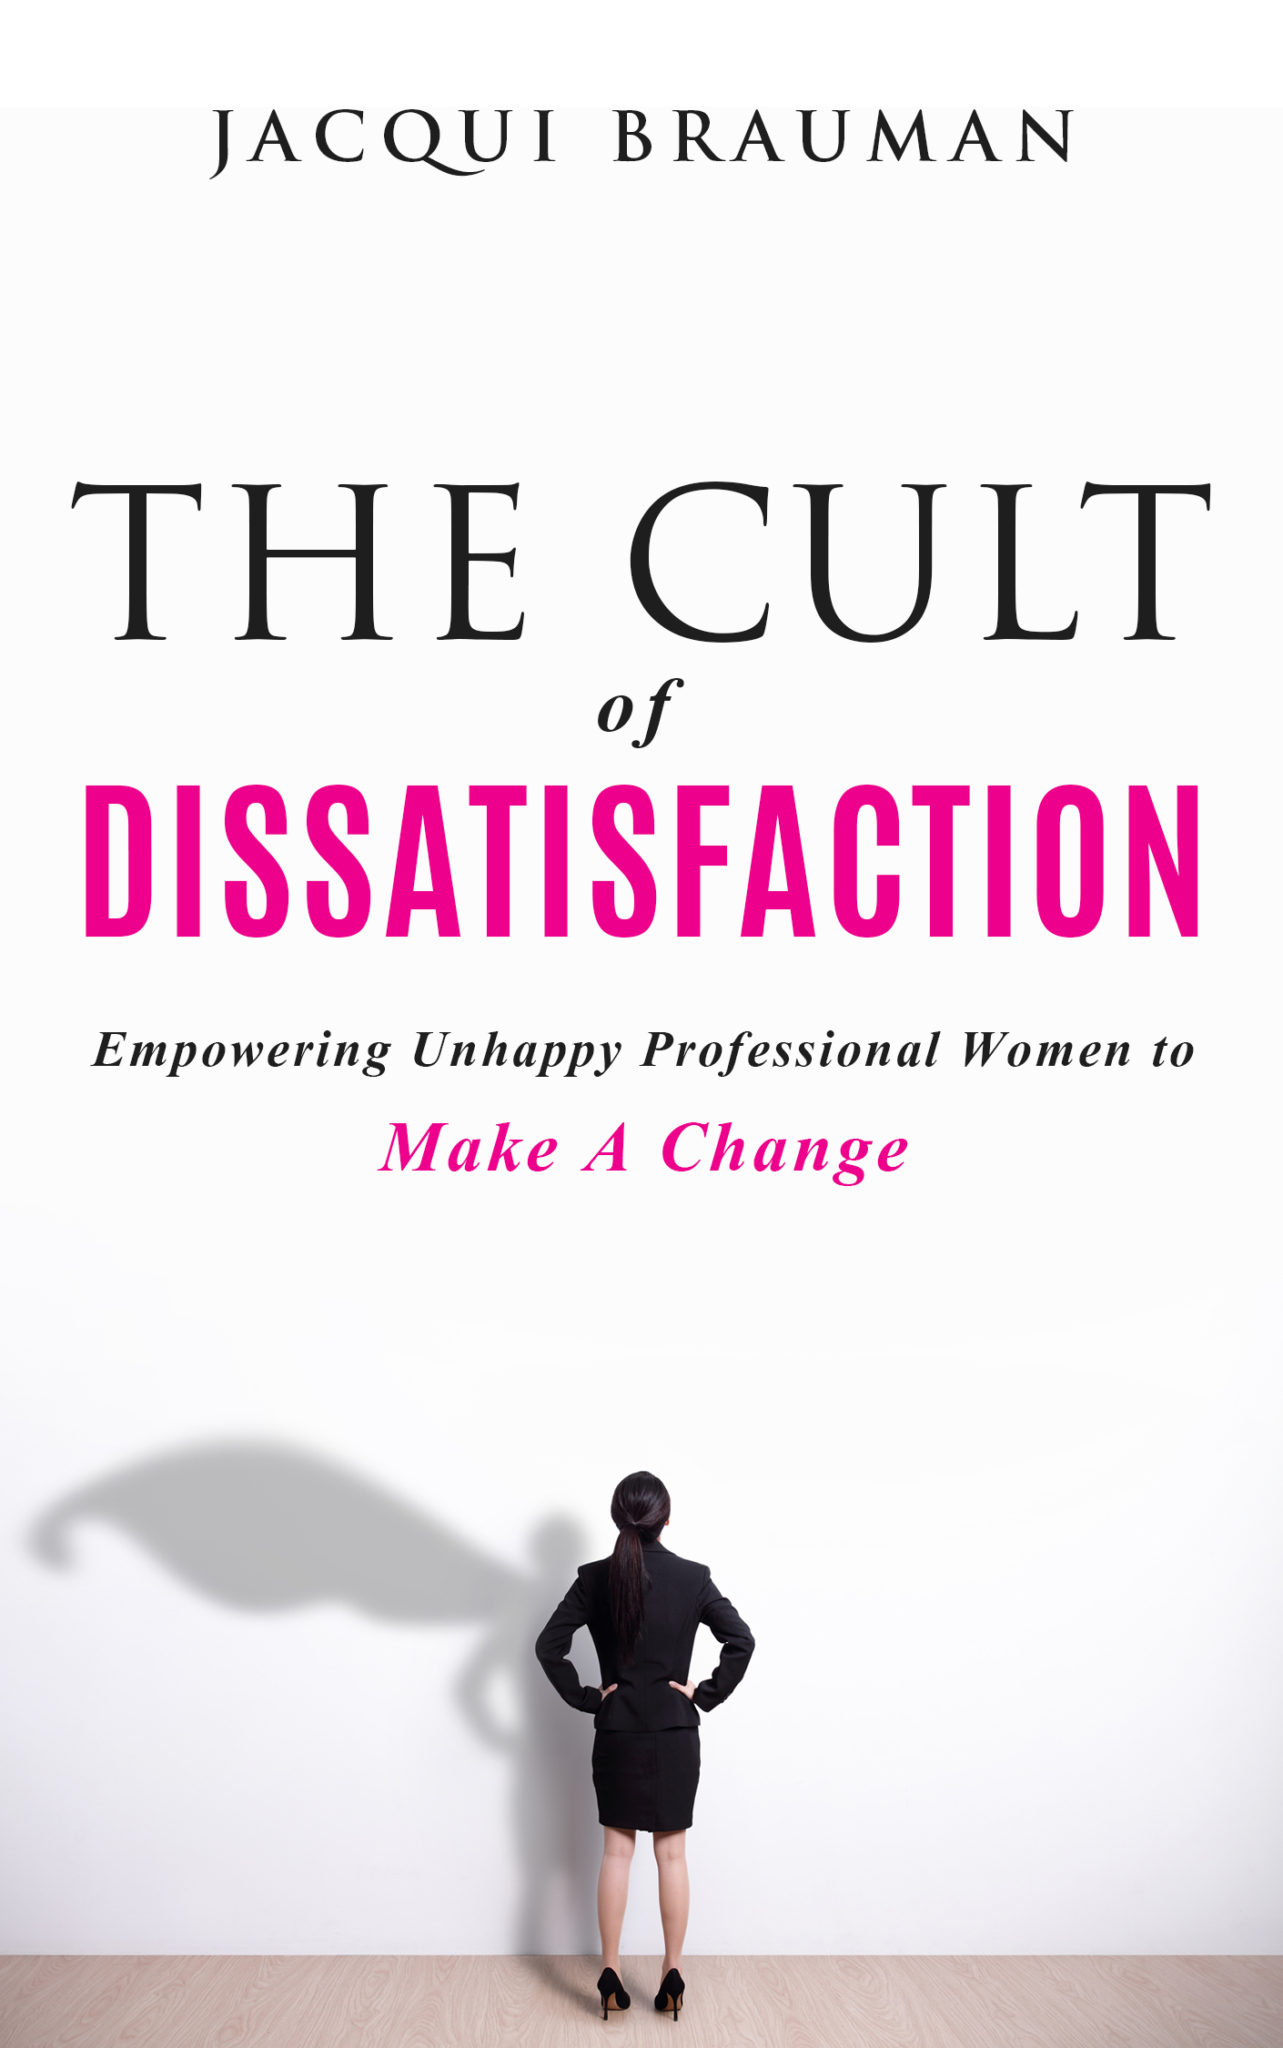 FREE: The Cult of Dissatisfaction by Jacqui Brauman